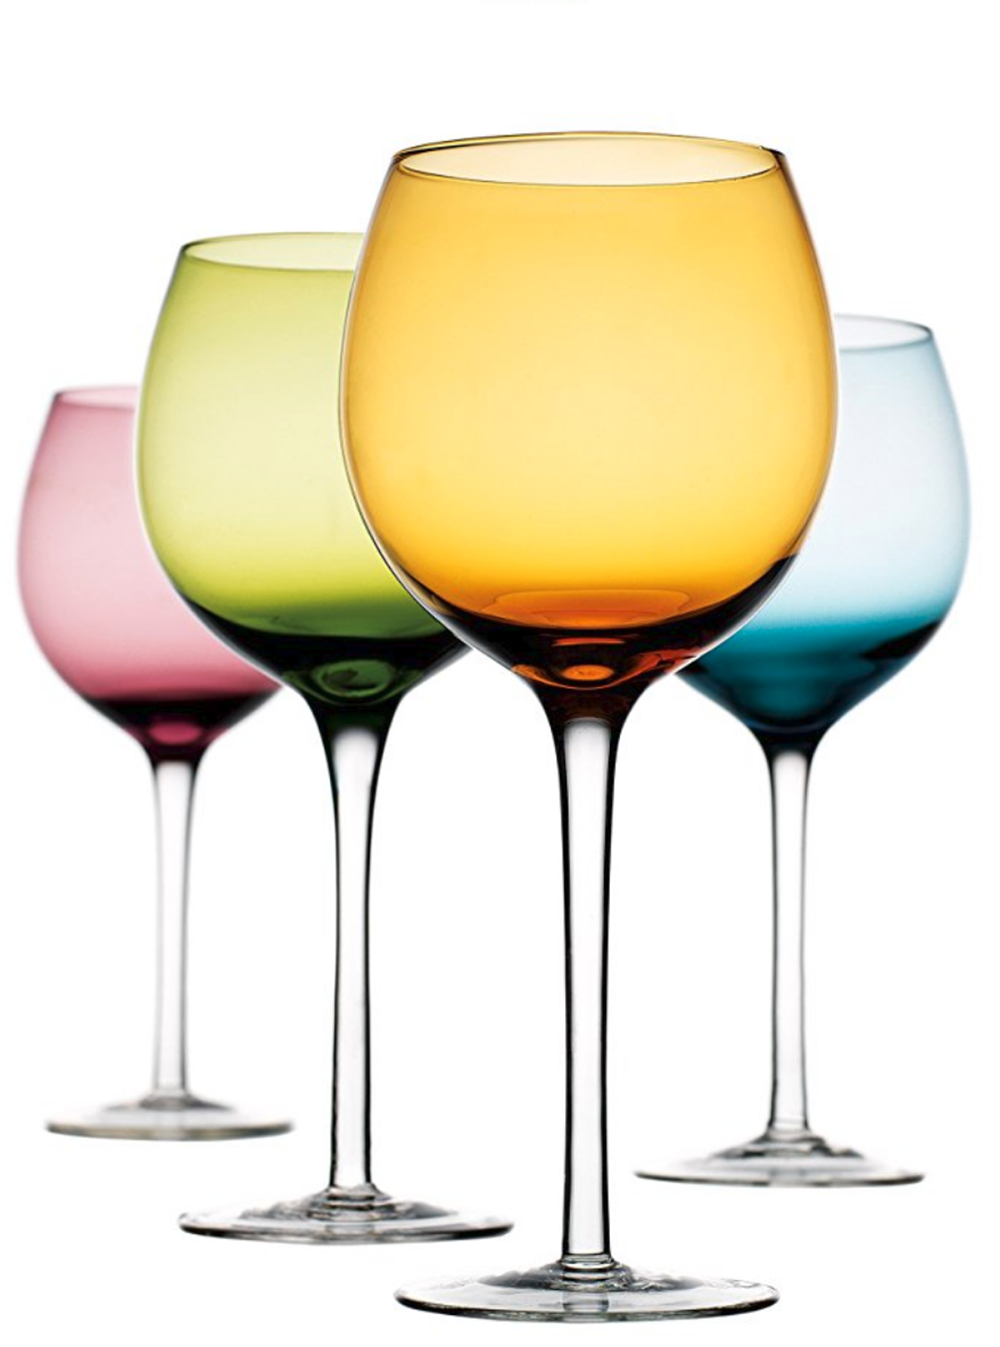 Image of colored wine glasses